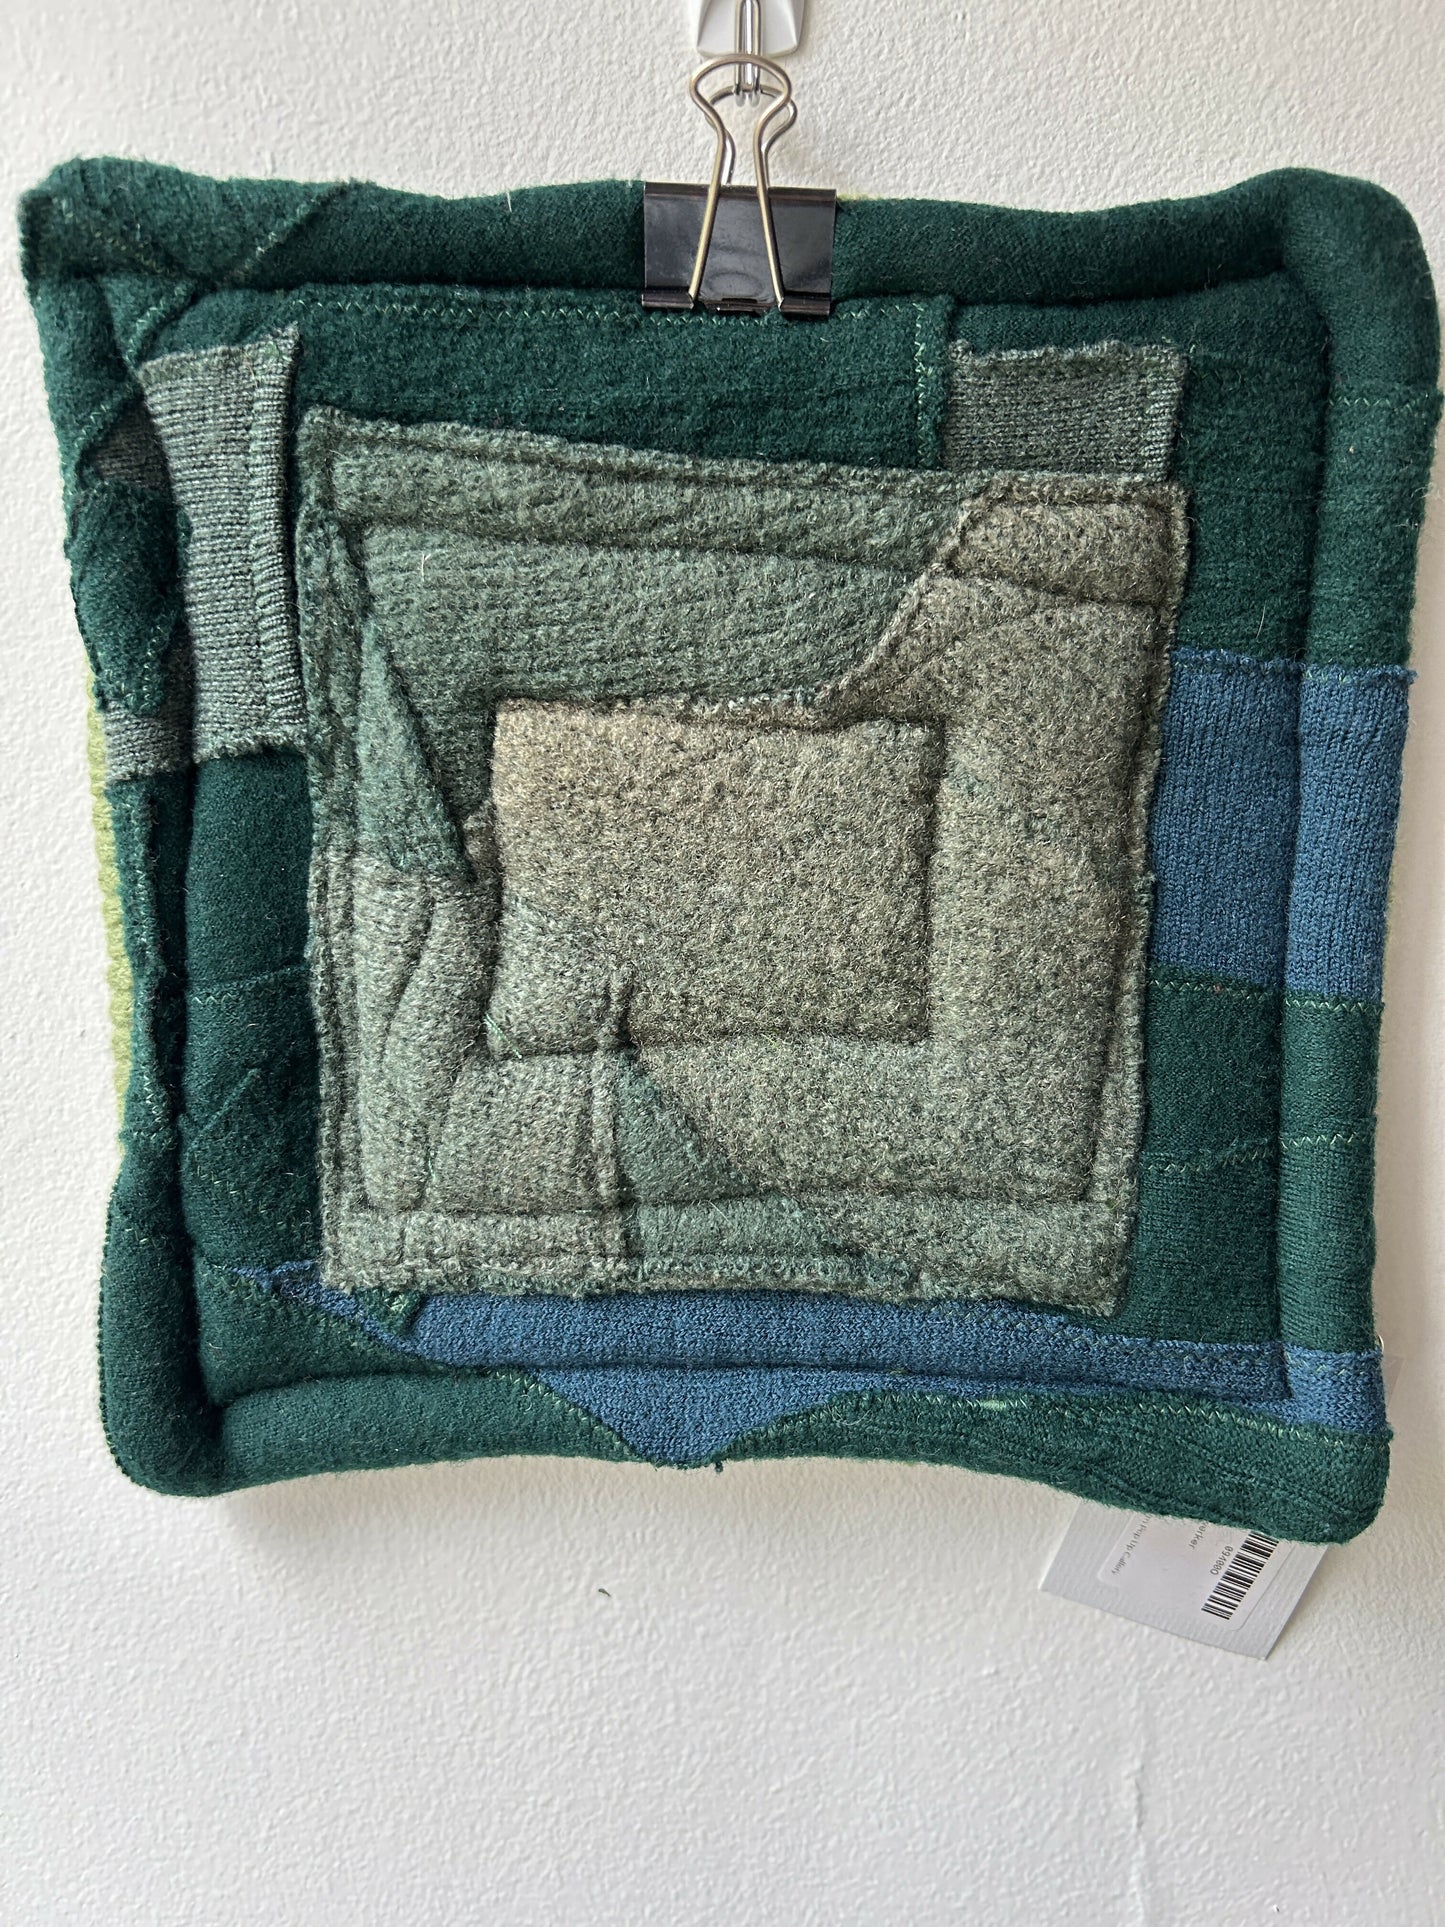 Upcycled Wool Trivet - Bright Green one side, blue/greens the other side